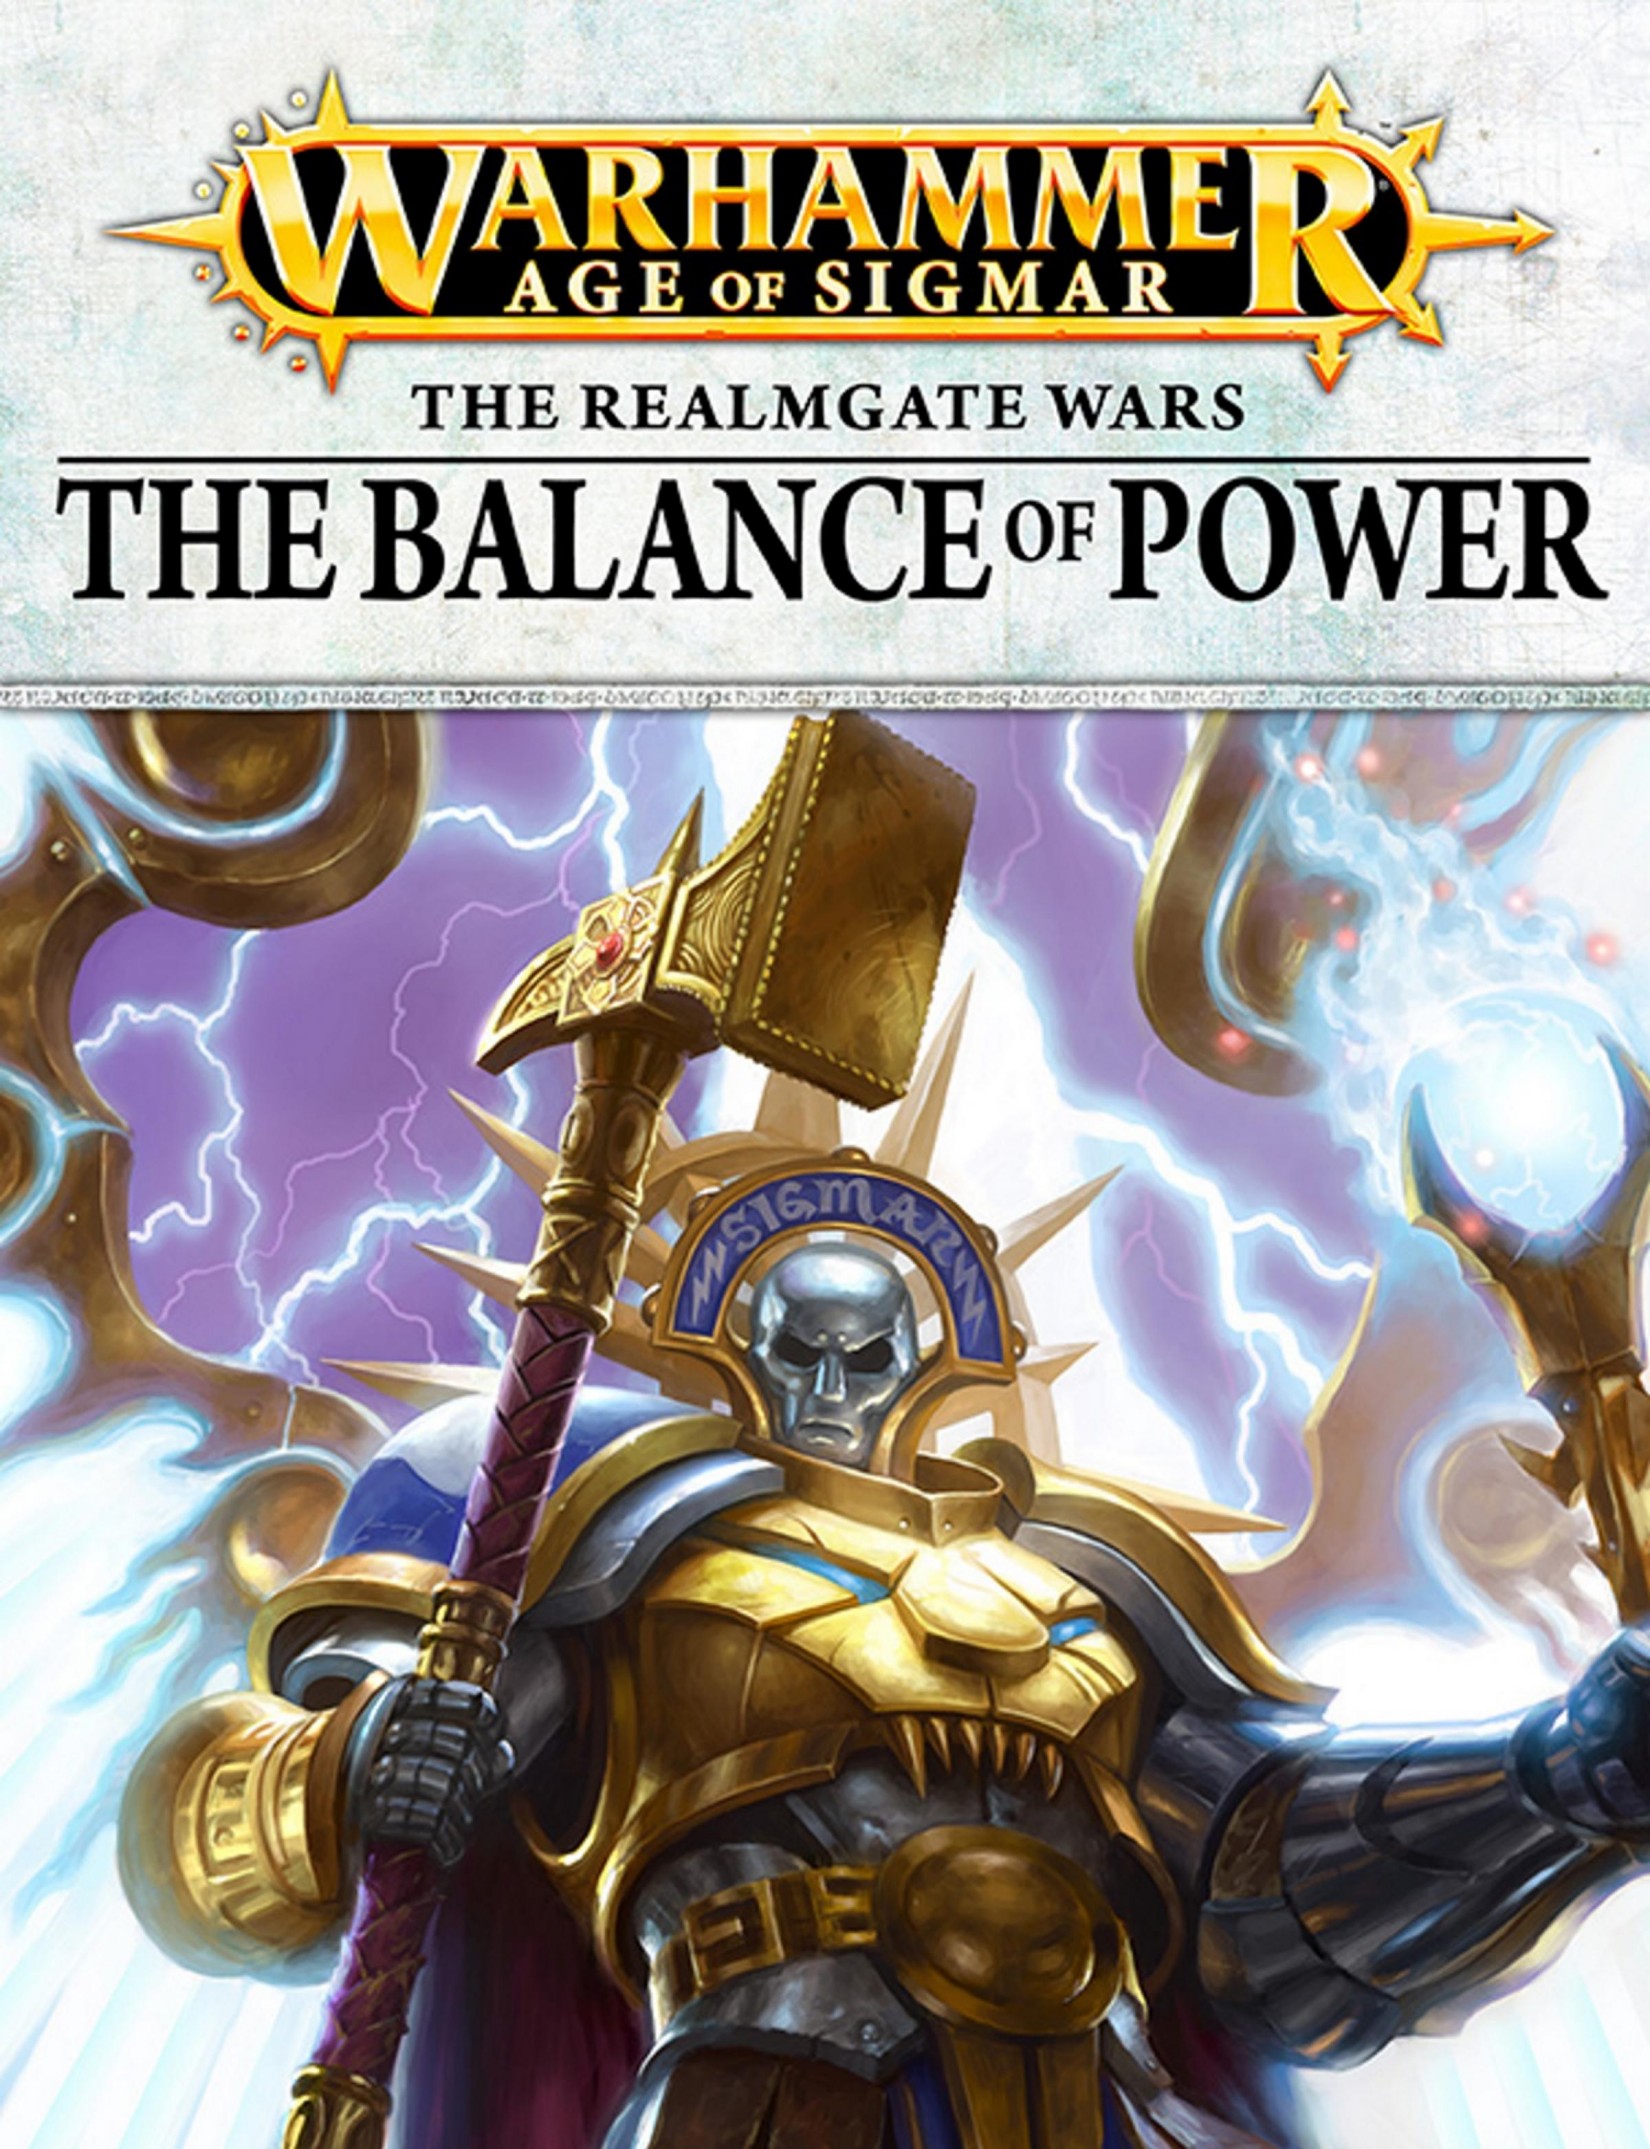 Warhammer: Age of Sigmar - The Realmgate Wars - The Balance of Power